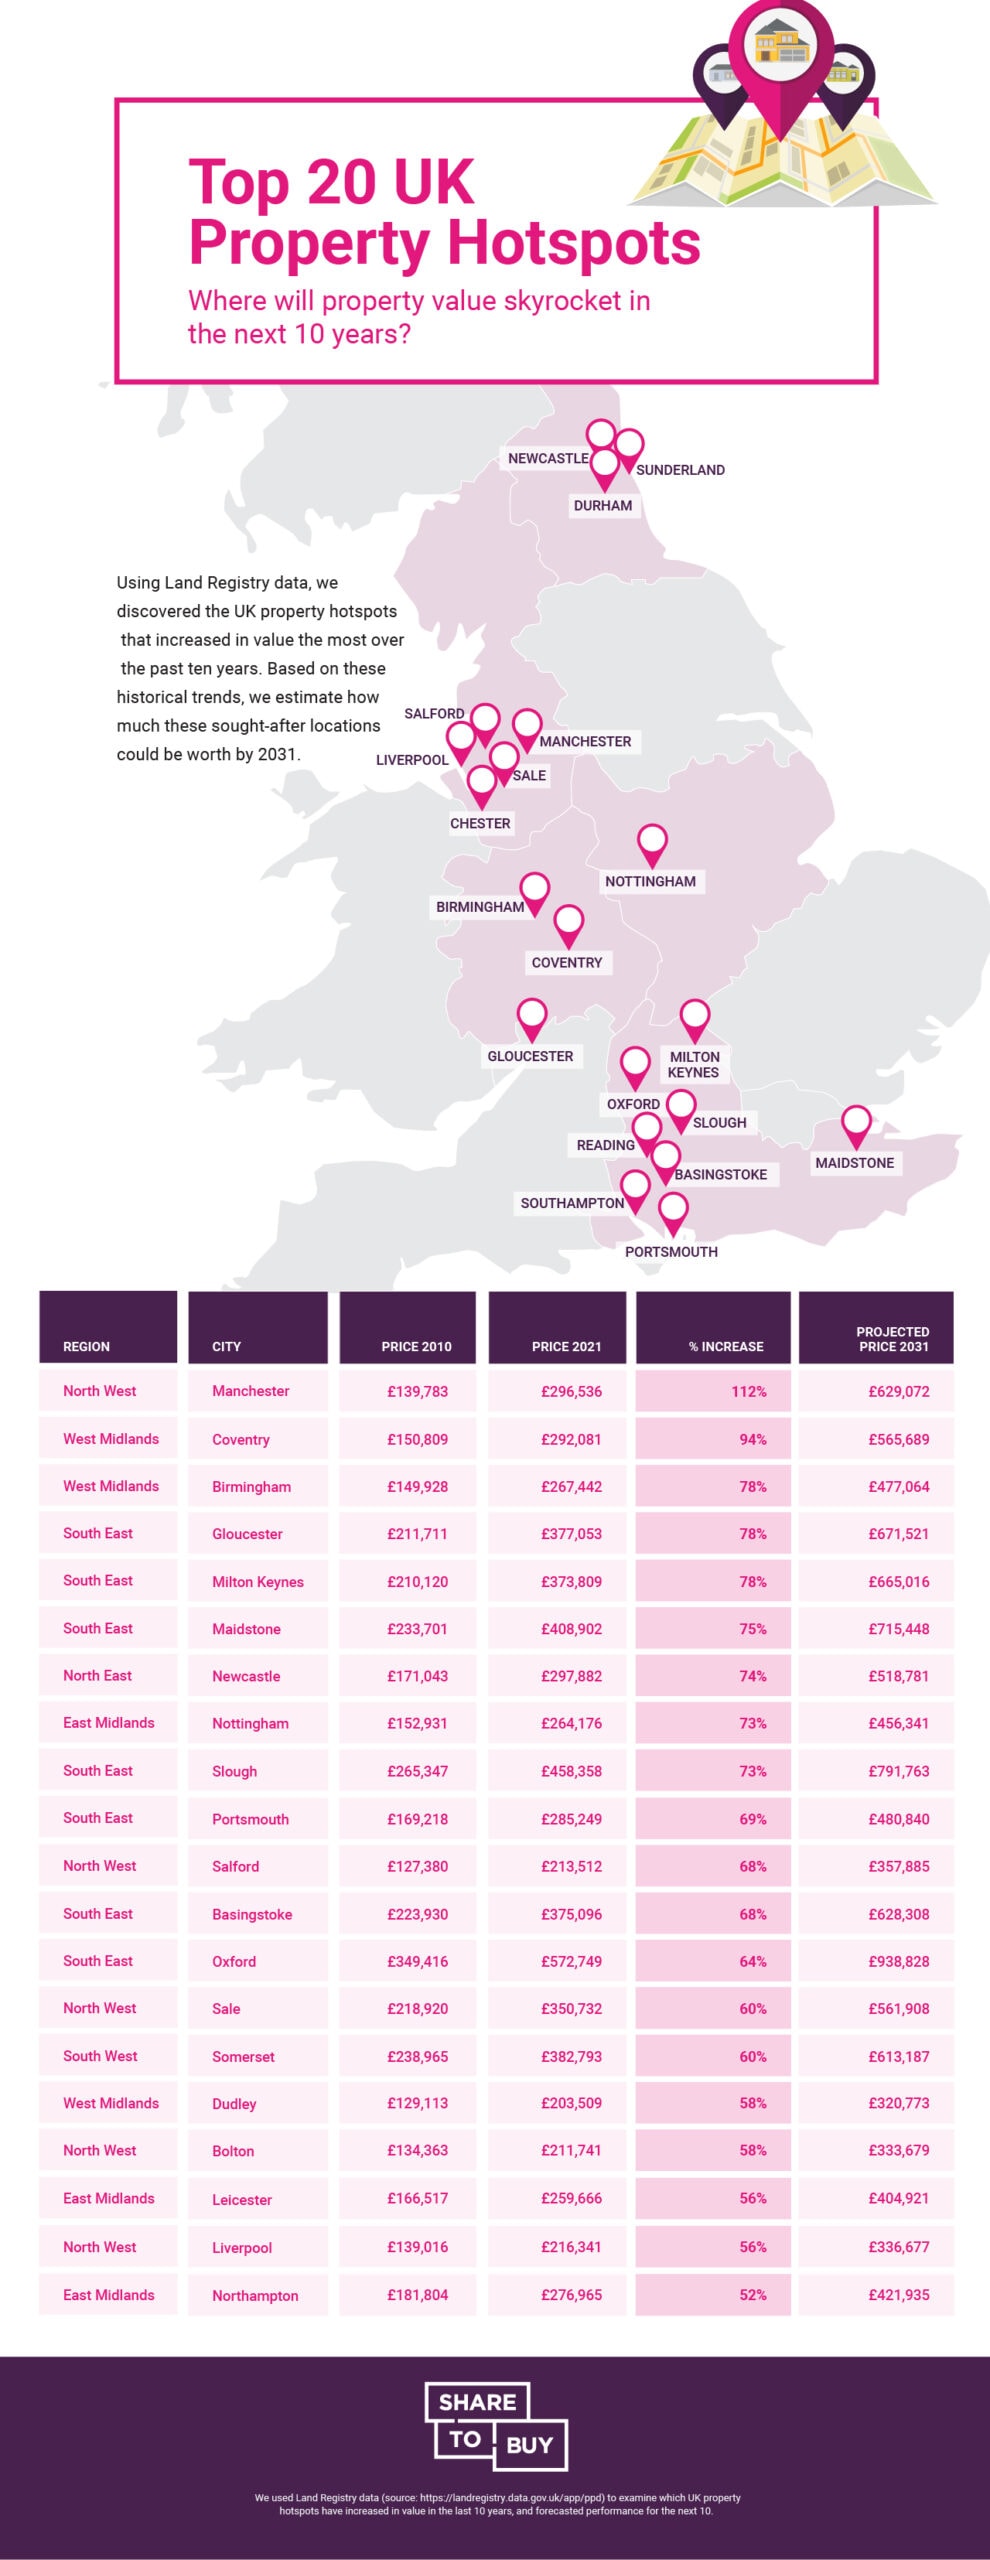 The UK’s Top 20 Property Hotspots: Buy in these areas for the biggest property value increases